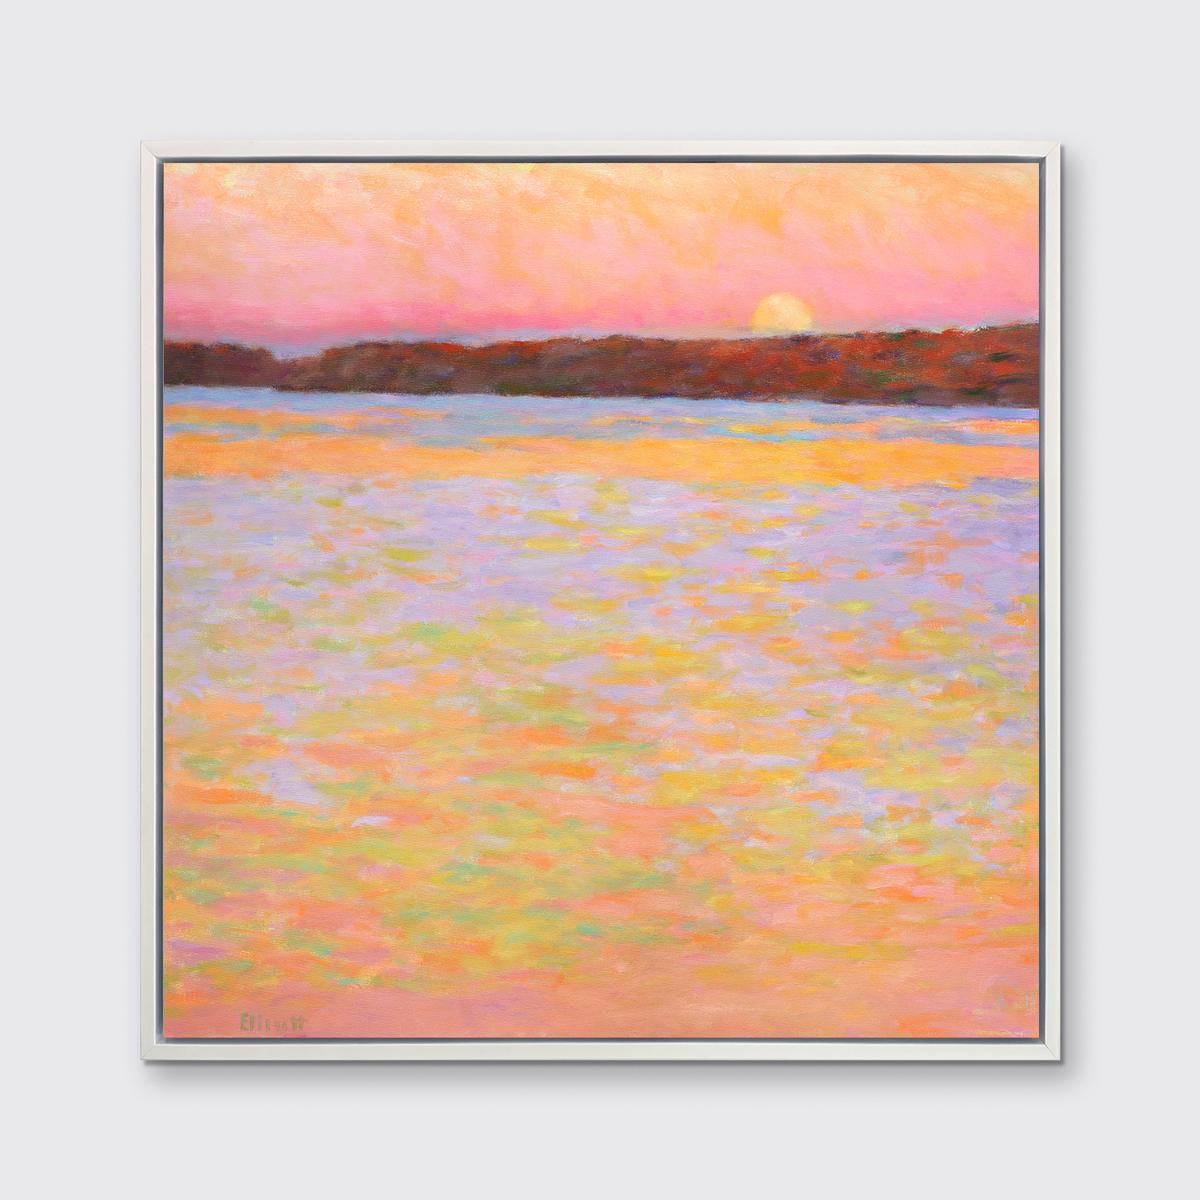 This abstract landscape limited edition print by Ken Elliott features a warm, vibrant palette and captures a landscape with the sun just along the horizon. The painting has an impressionistic style, with green, orange, blue, and pink layered